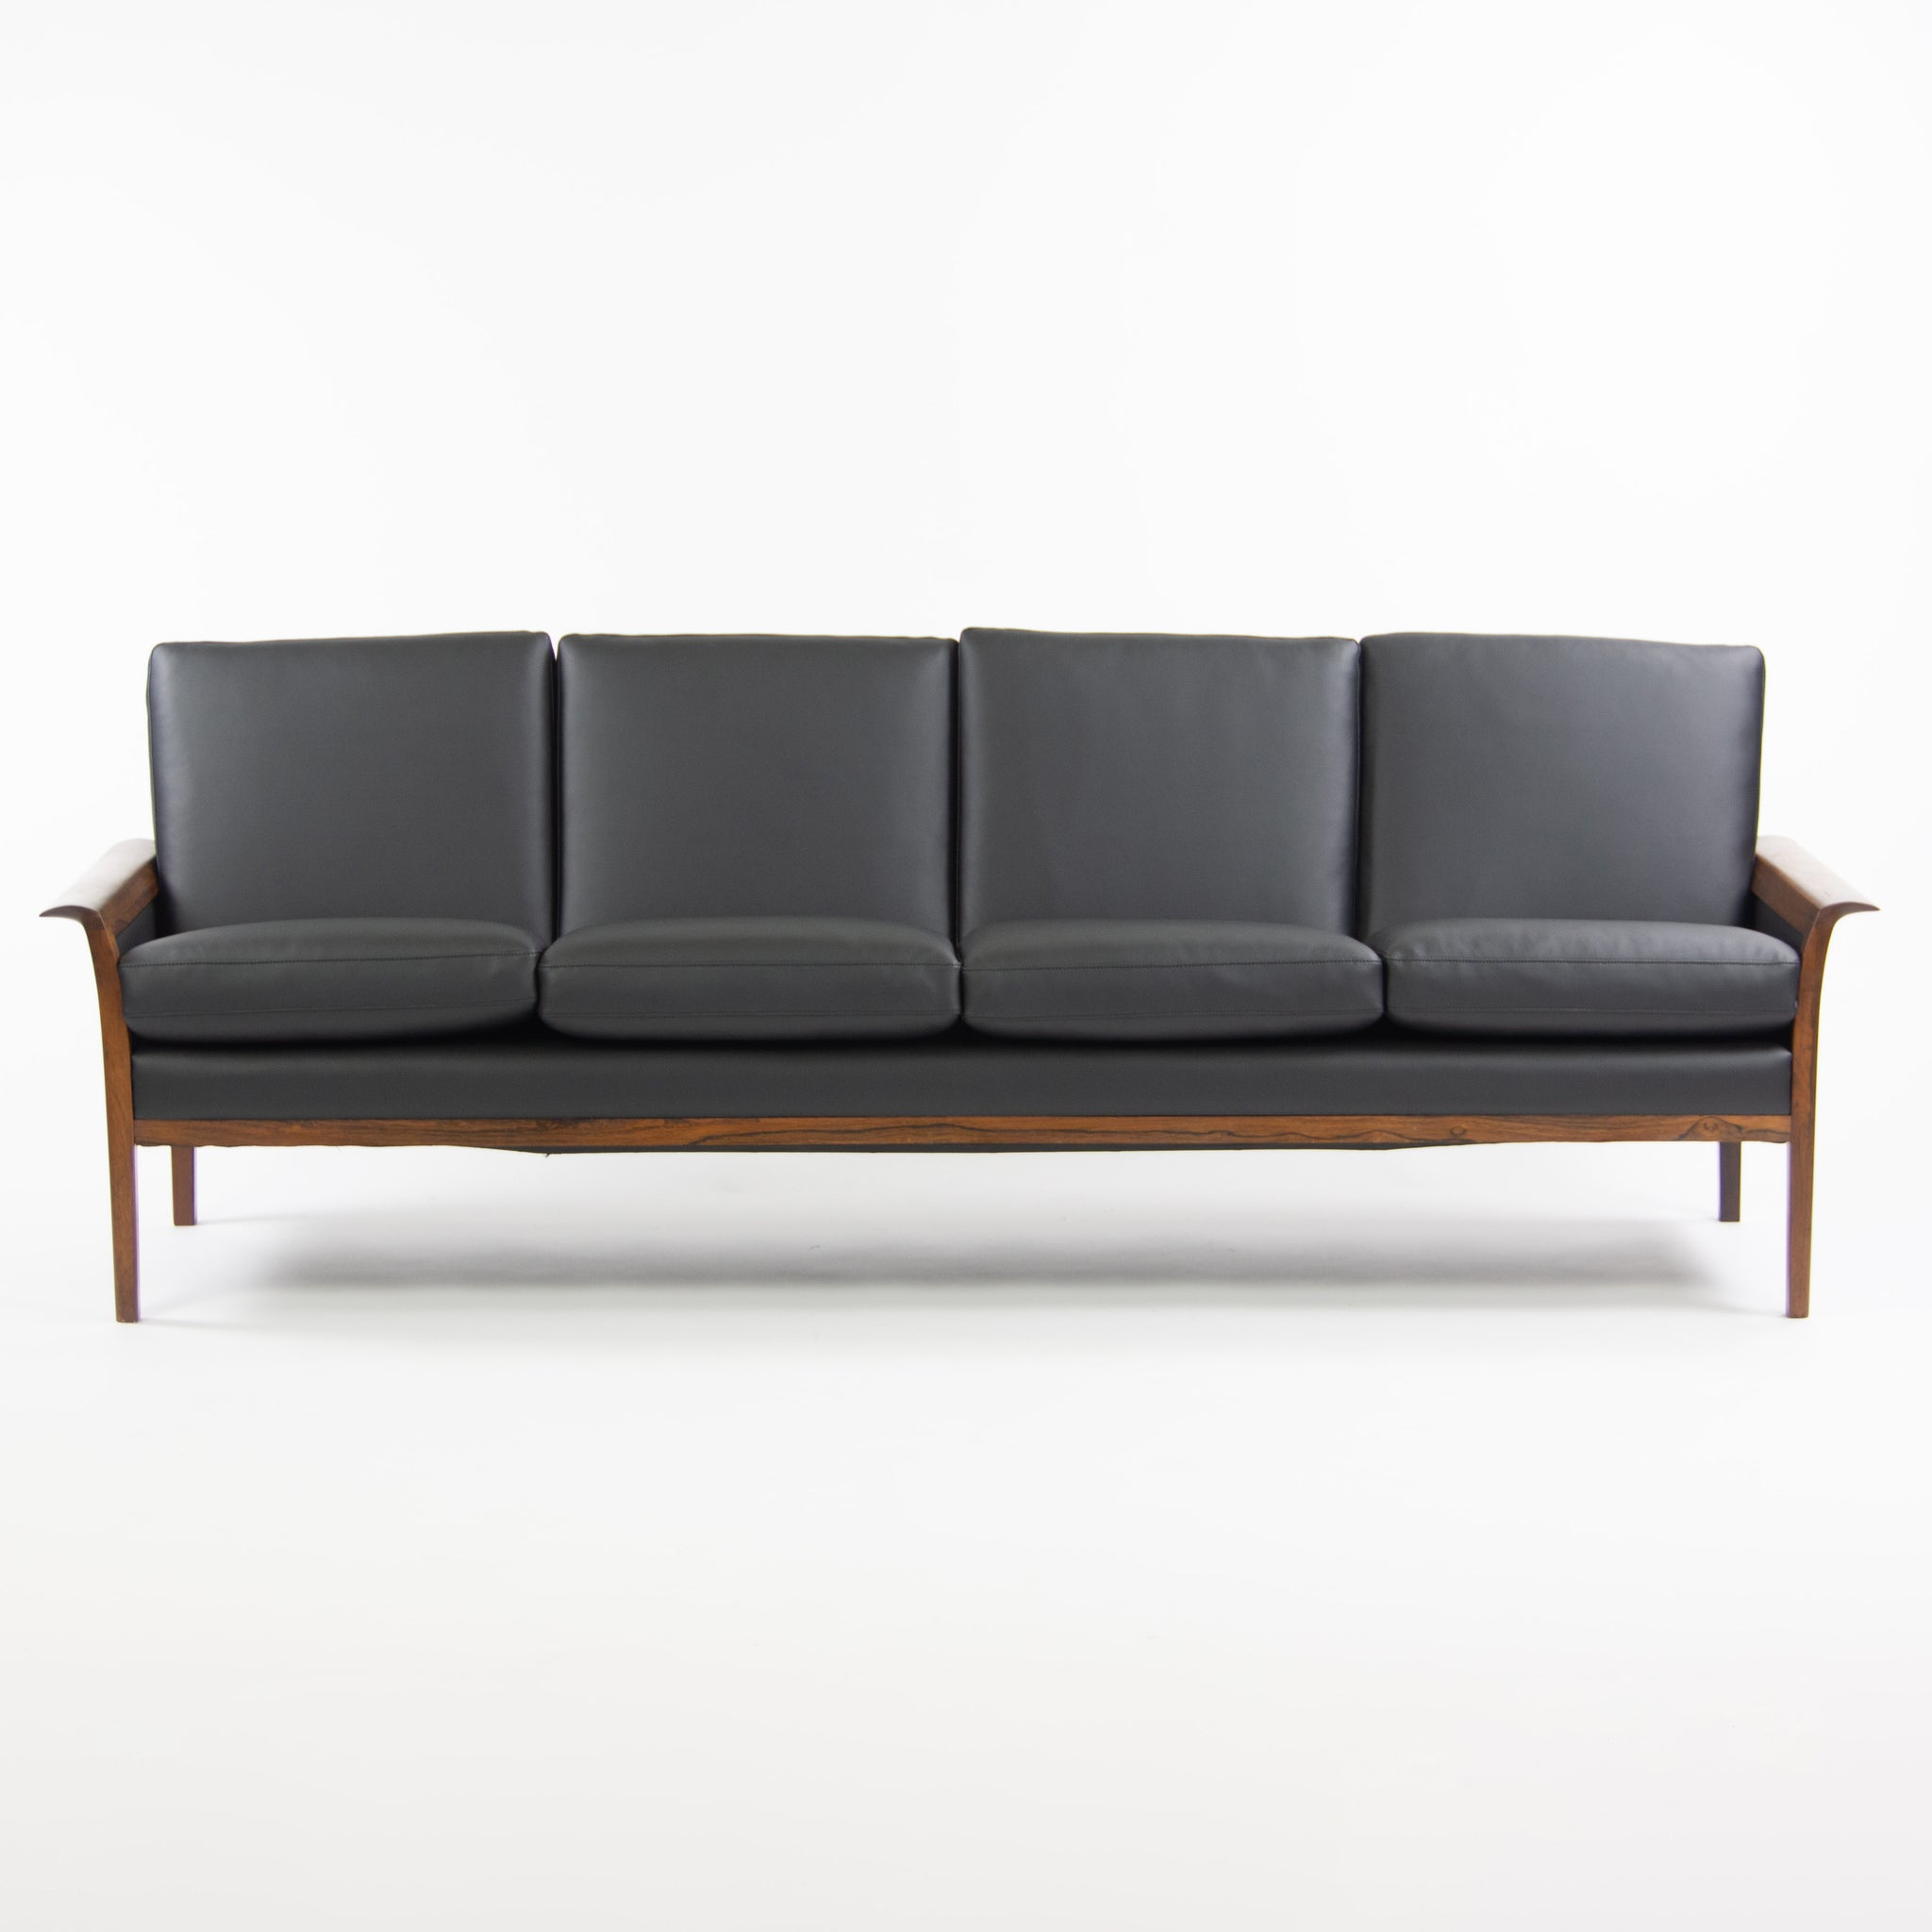 1960's Knut Saeter Rosewood Sofa for Vatne Mobler Norway New Black Upholstery